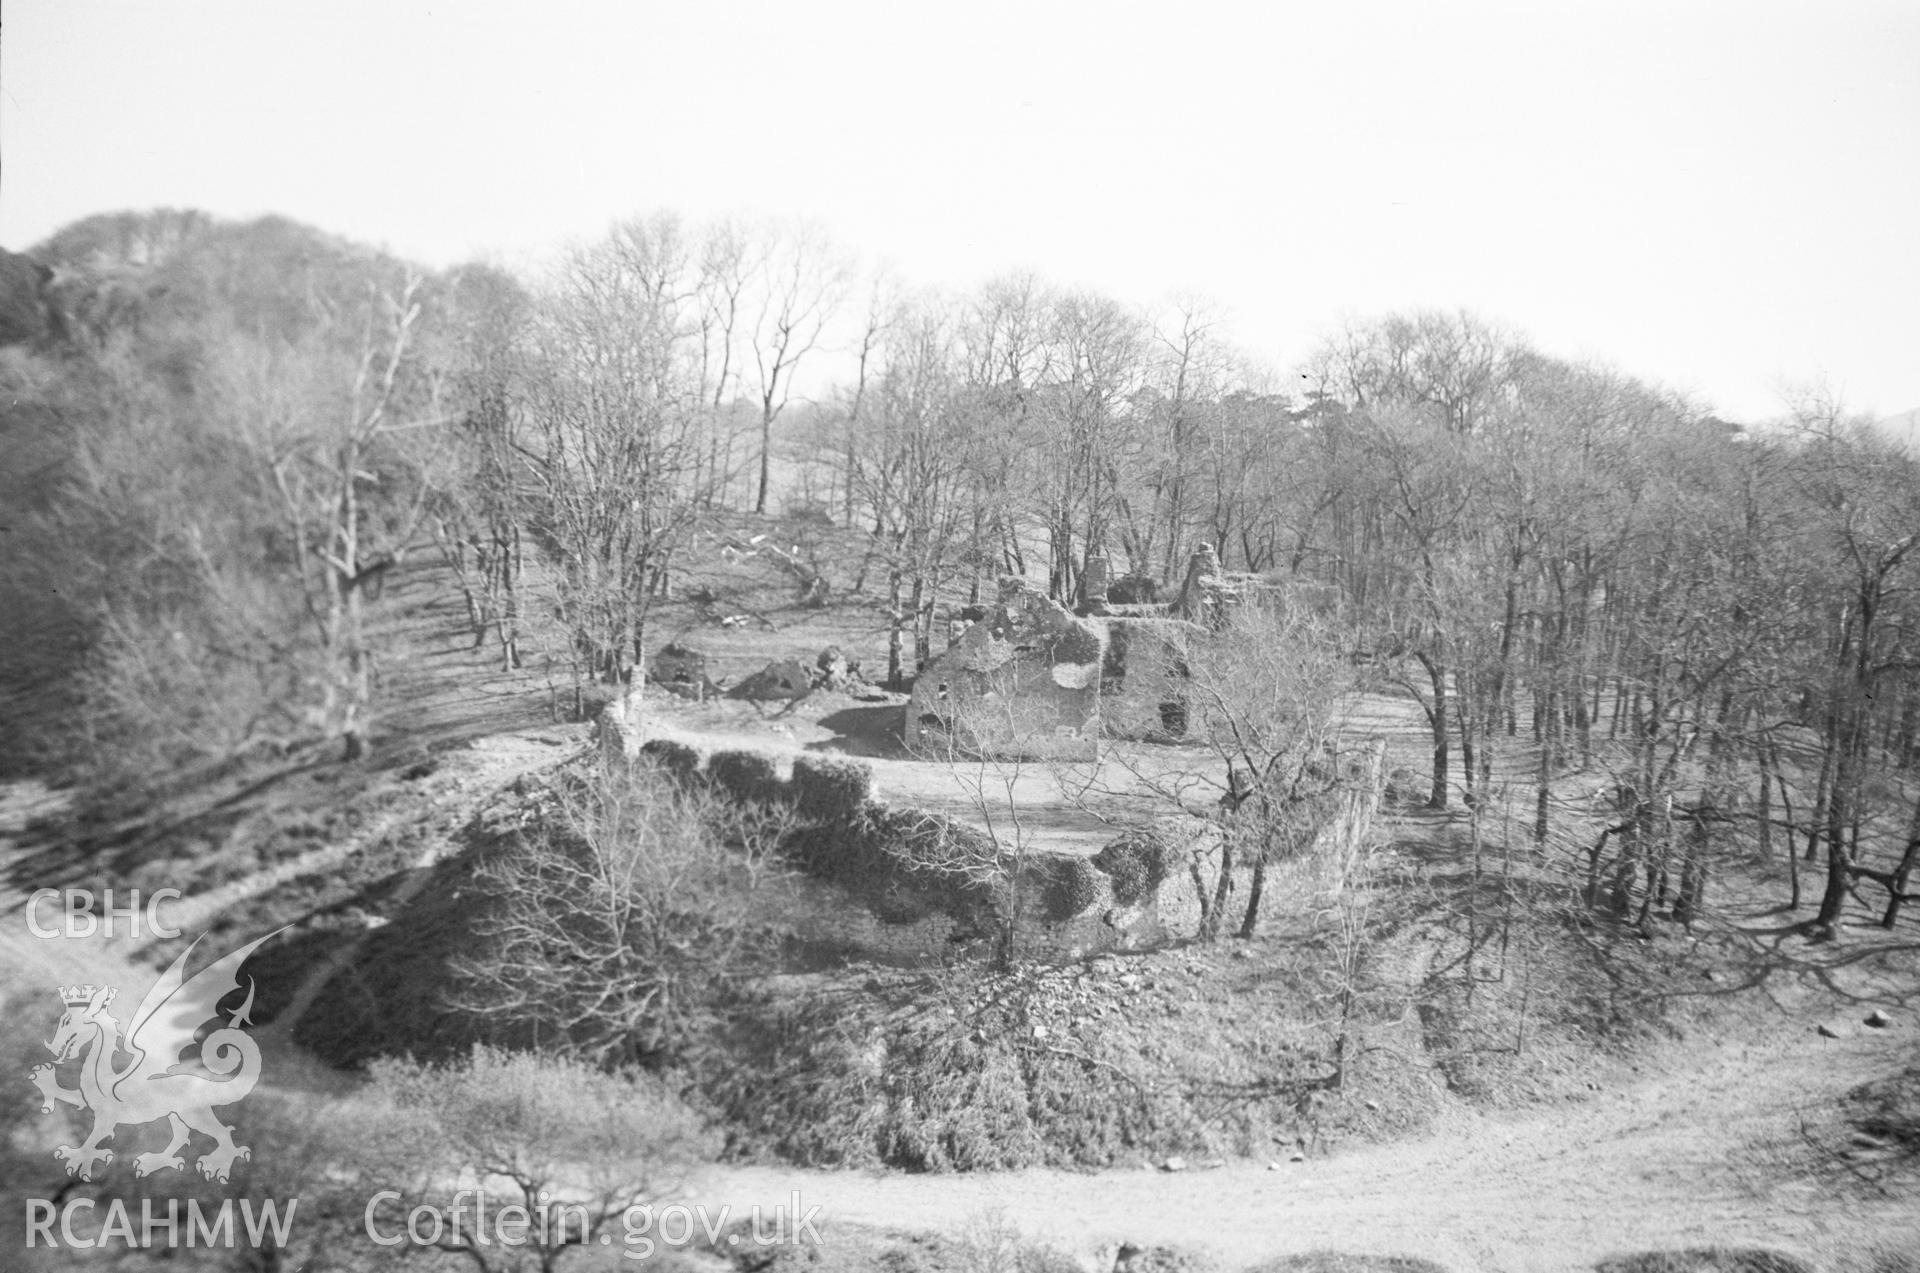 Digital copy of a nitrate negative showing Candleston Castle, Merthyr Mawr. From the Cadw Monuments in Care Collection.